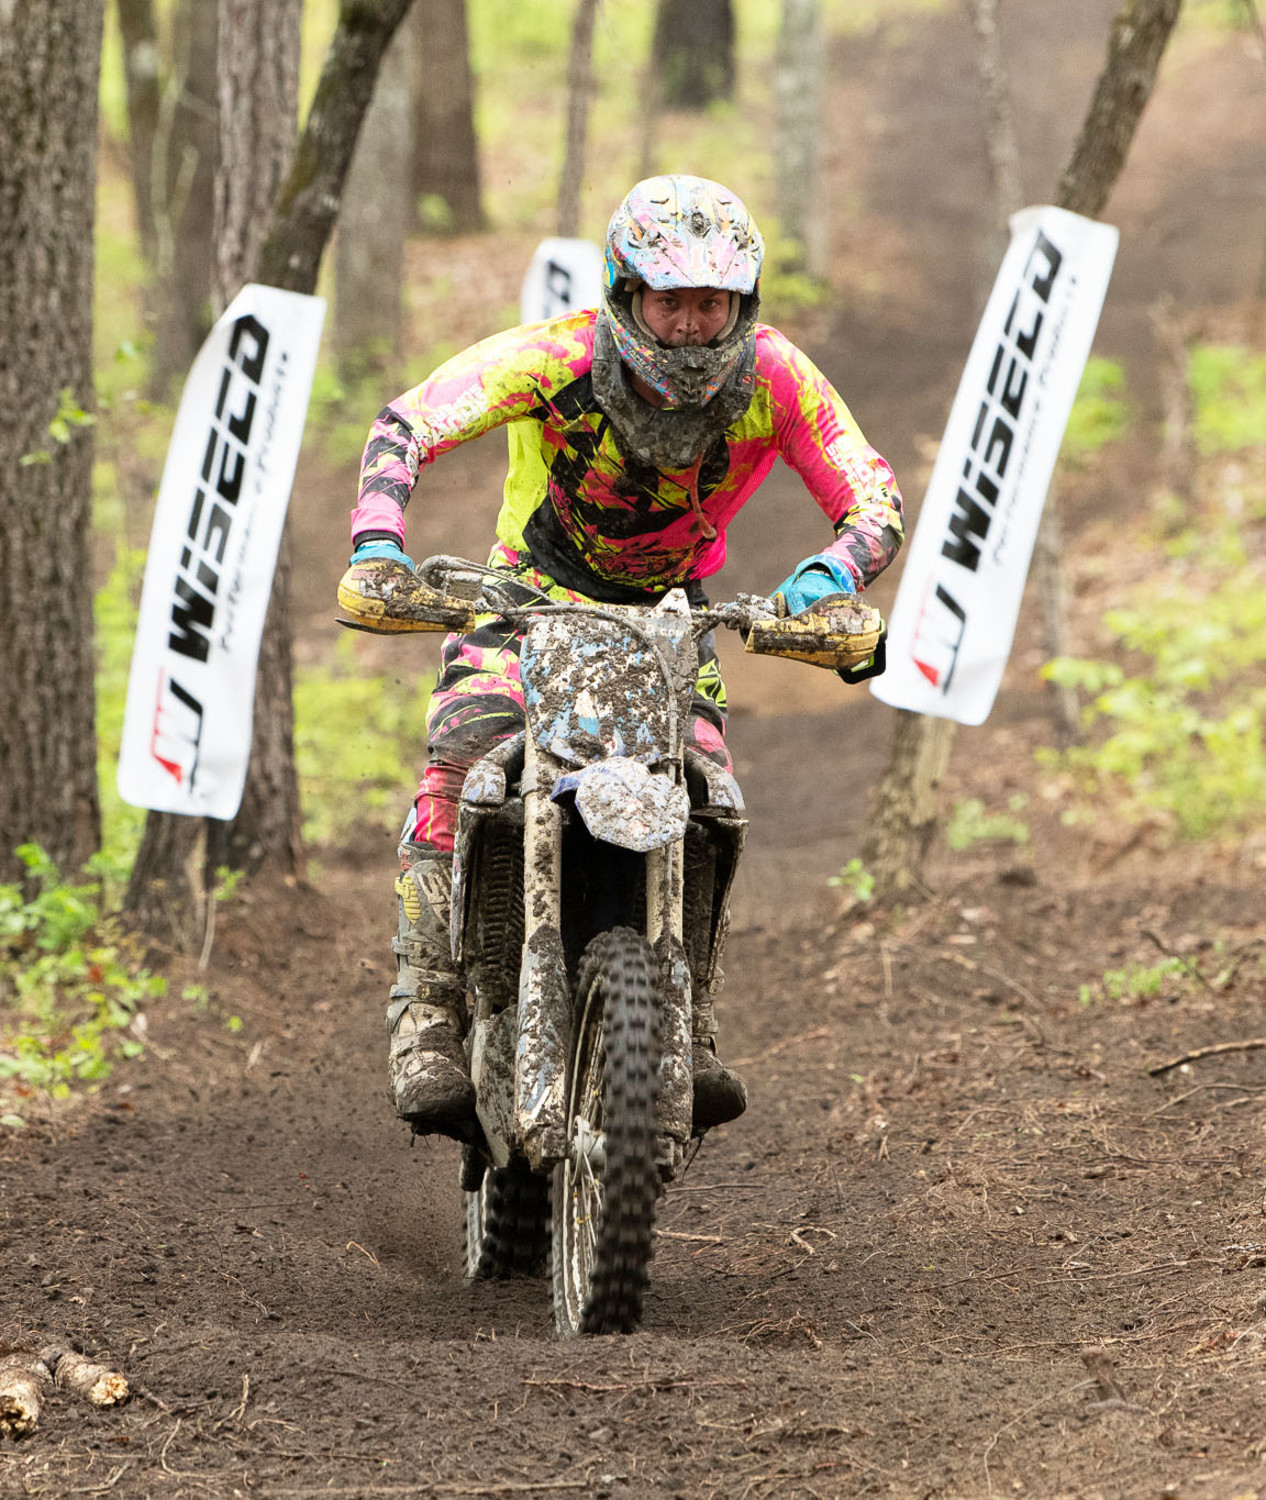 Sumter native Josh McCoy tries his luck at the GNCC Manning Live image image